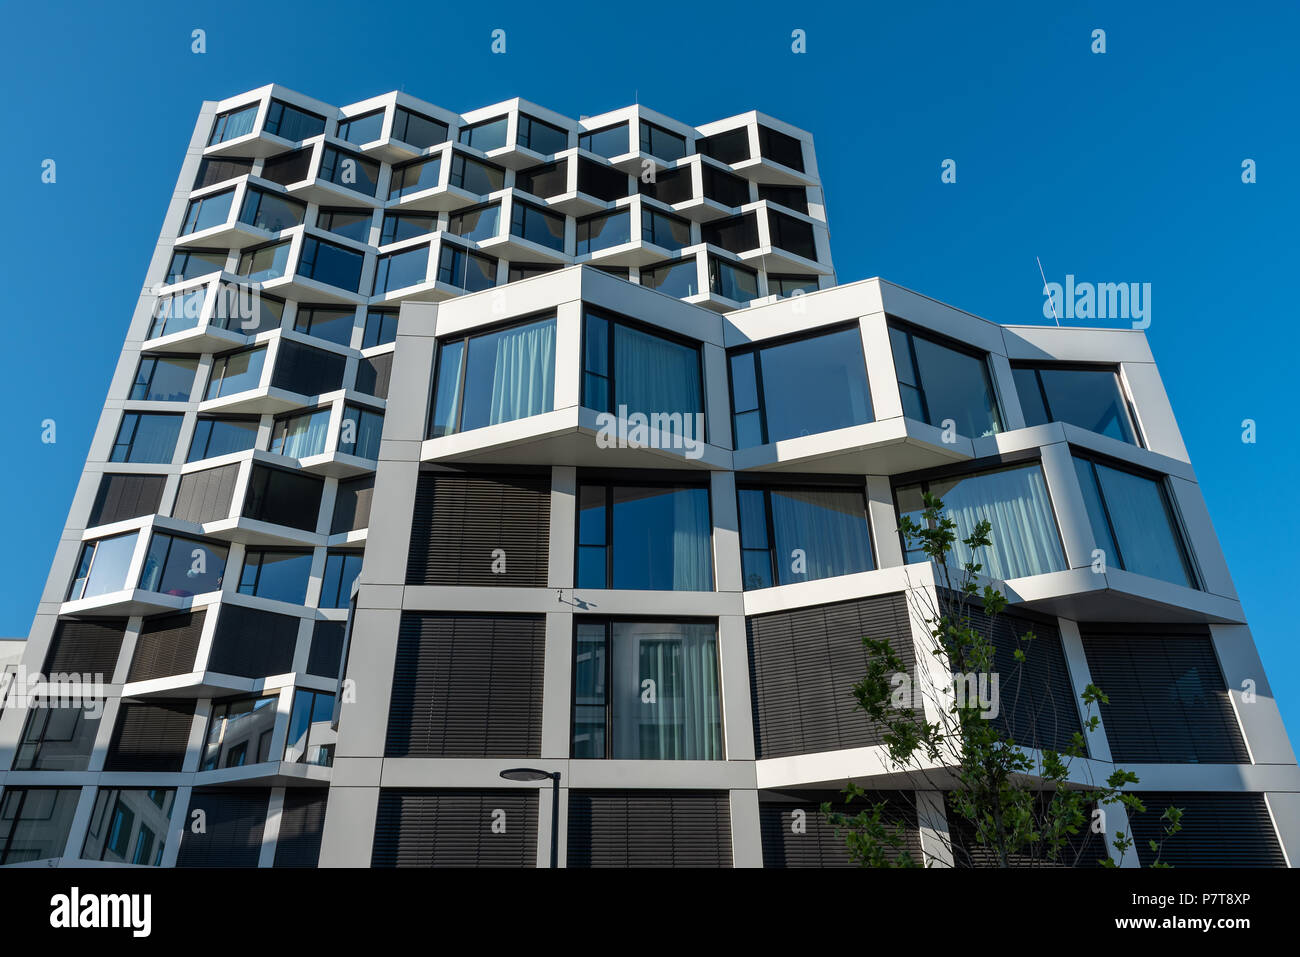 Facade of modern high-rise residential building seen in Munich, Germany Stock Photo